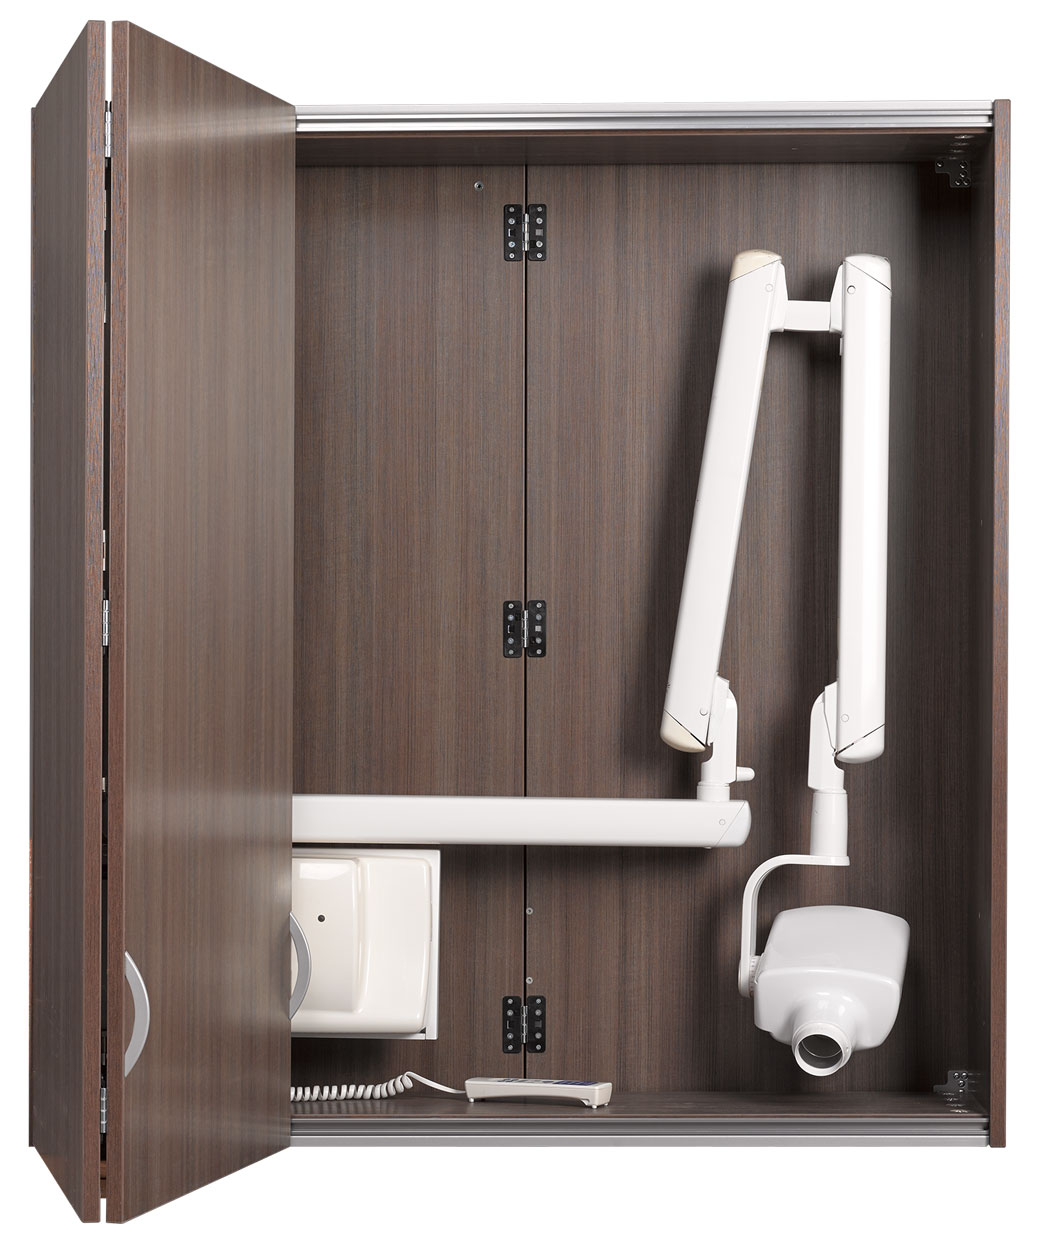 A-dec Inspire 595 wall-mounted cabinets with x-ray storage